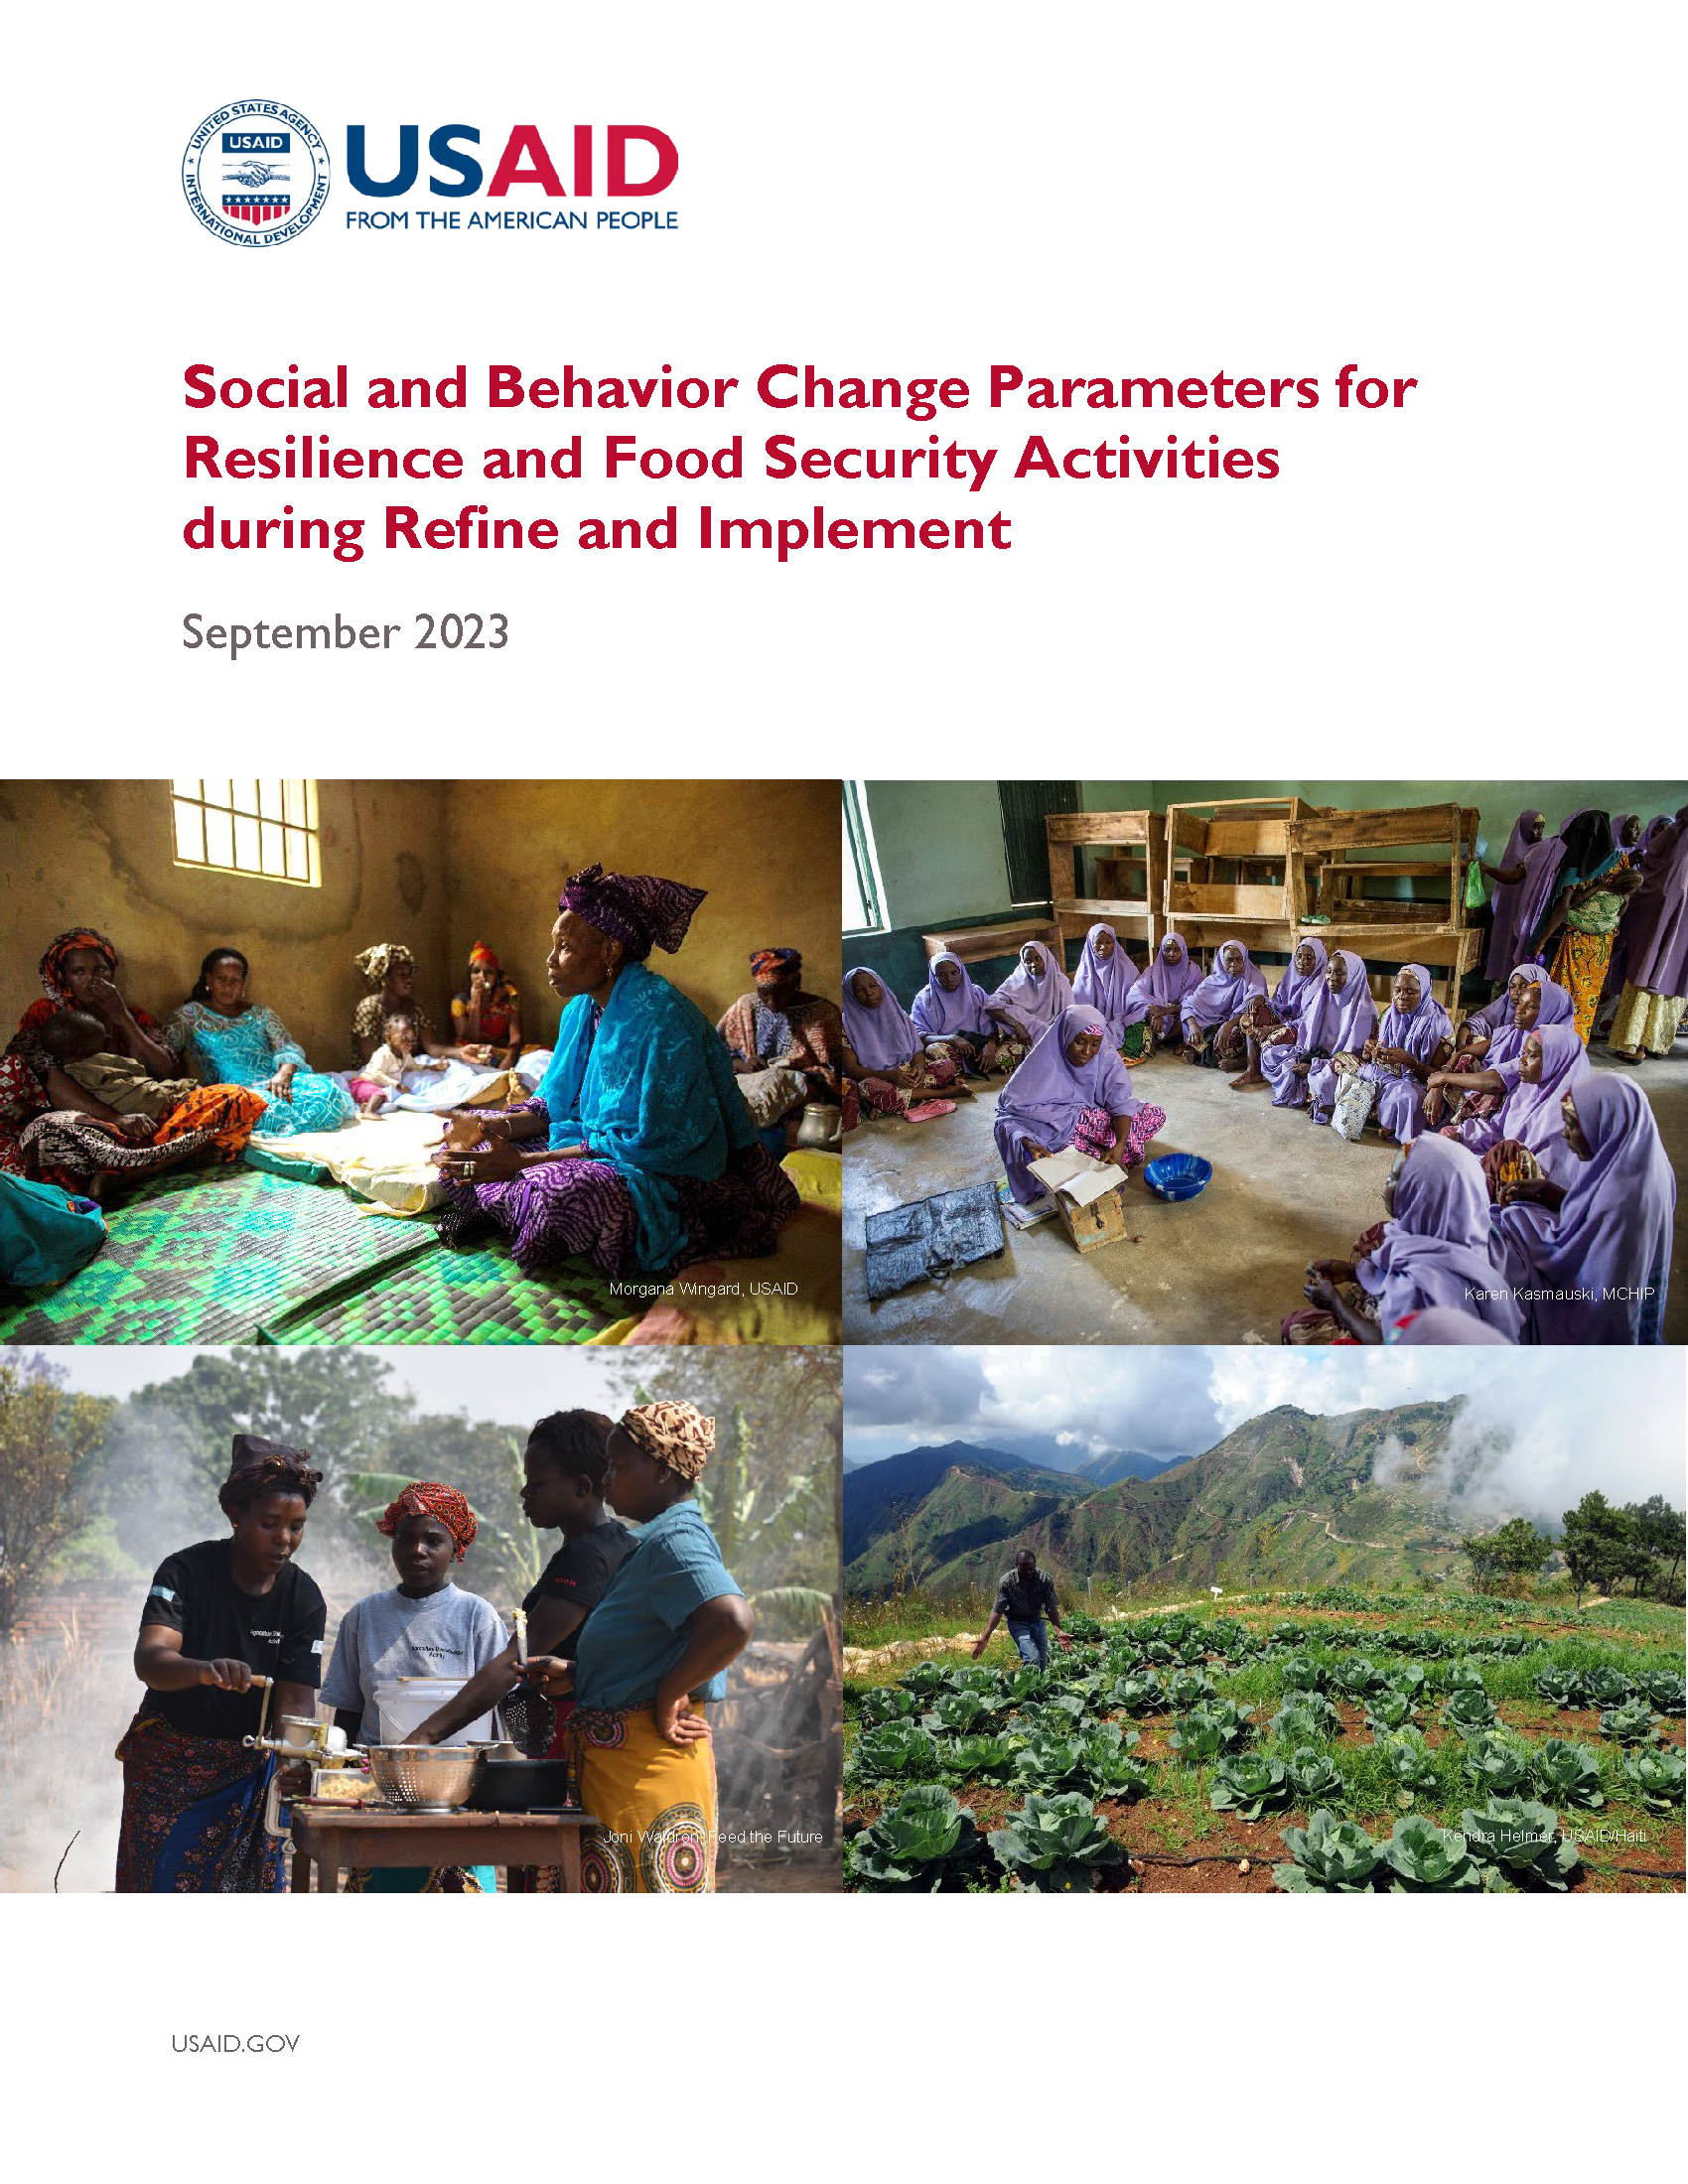 Cover page for Social and Behavior Change Parameters for Resilience and Food Security Activities during Refine and Implement